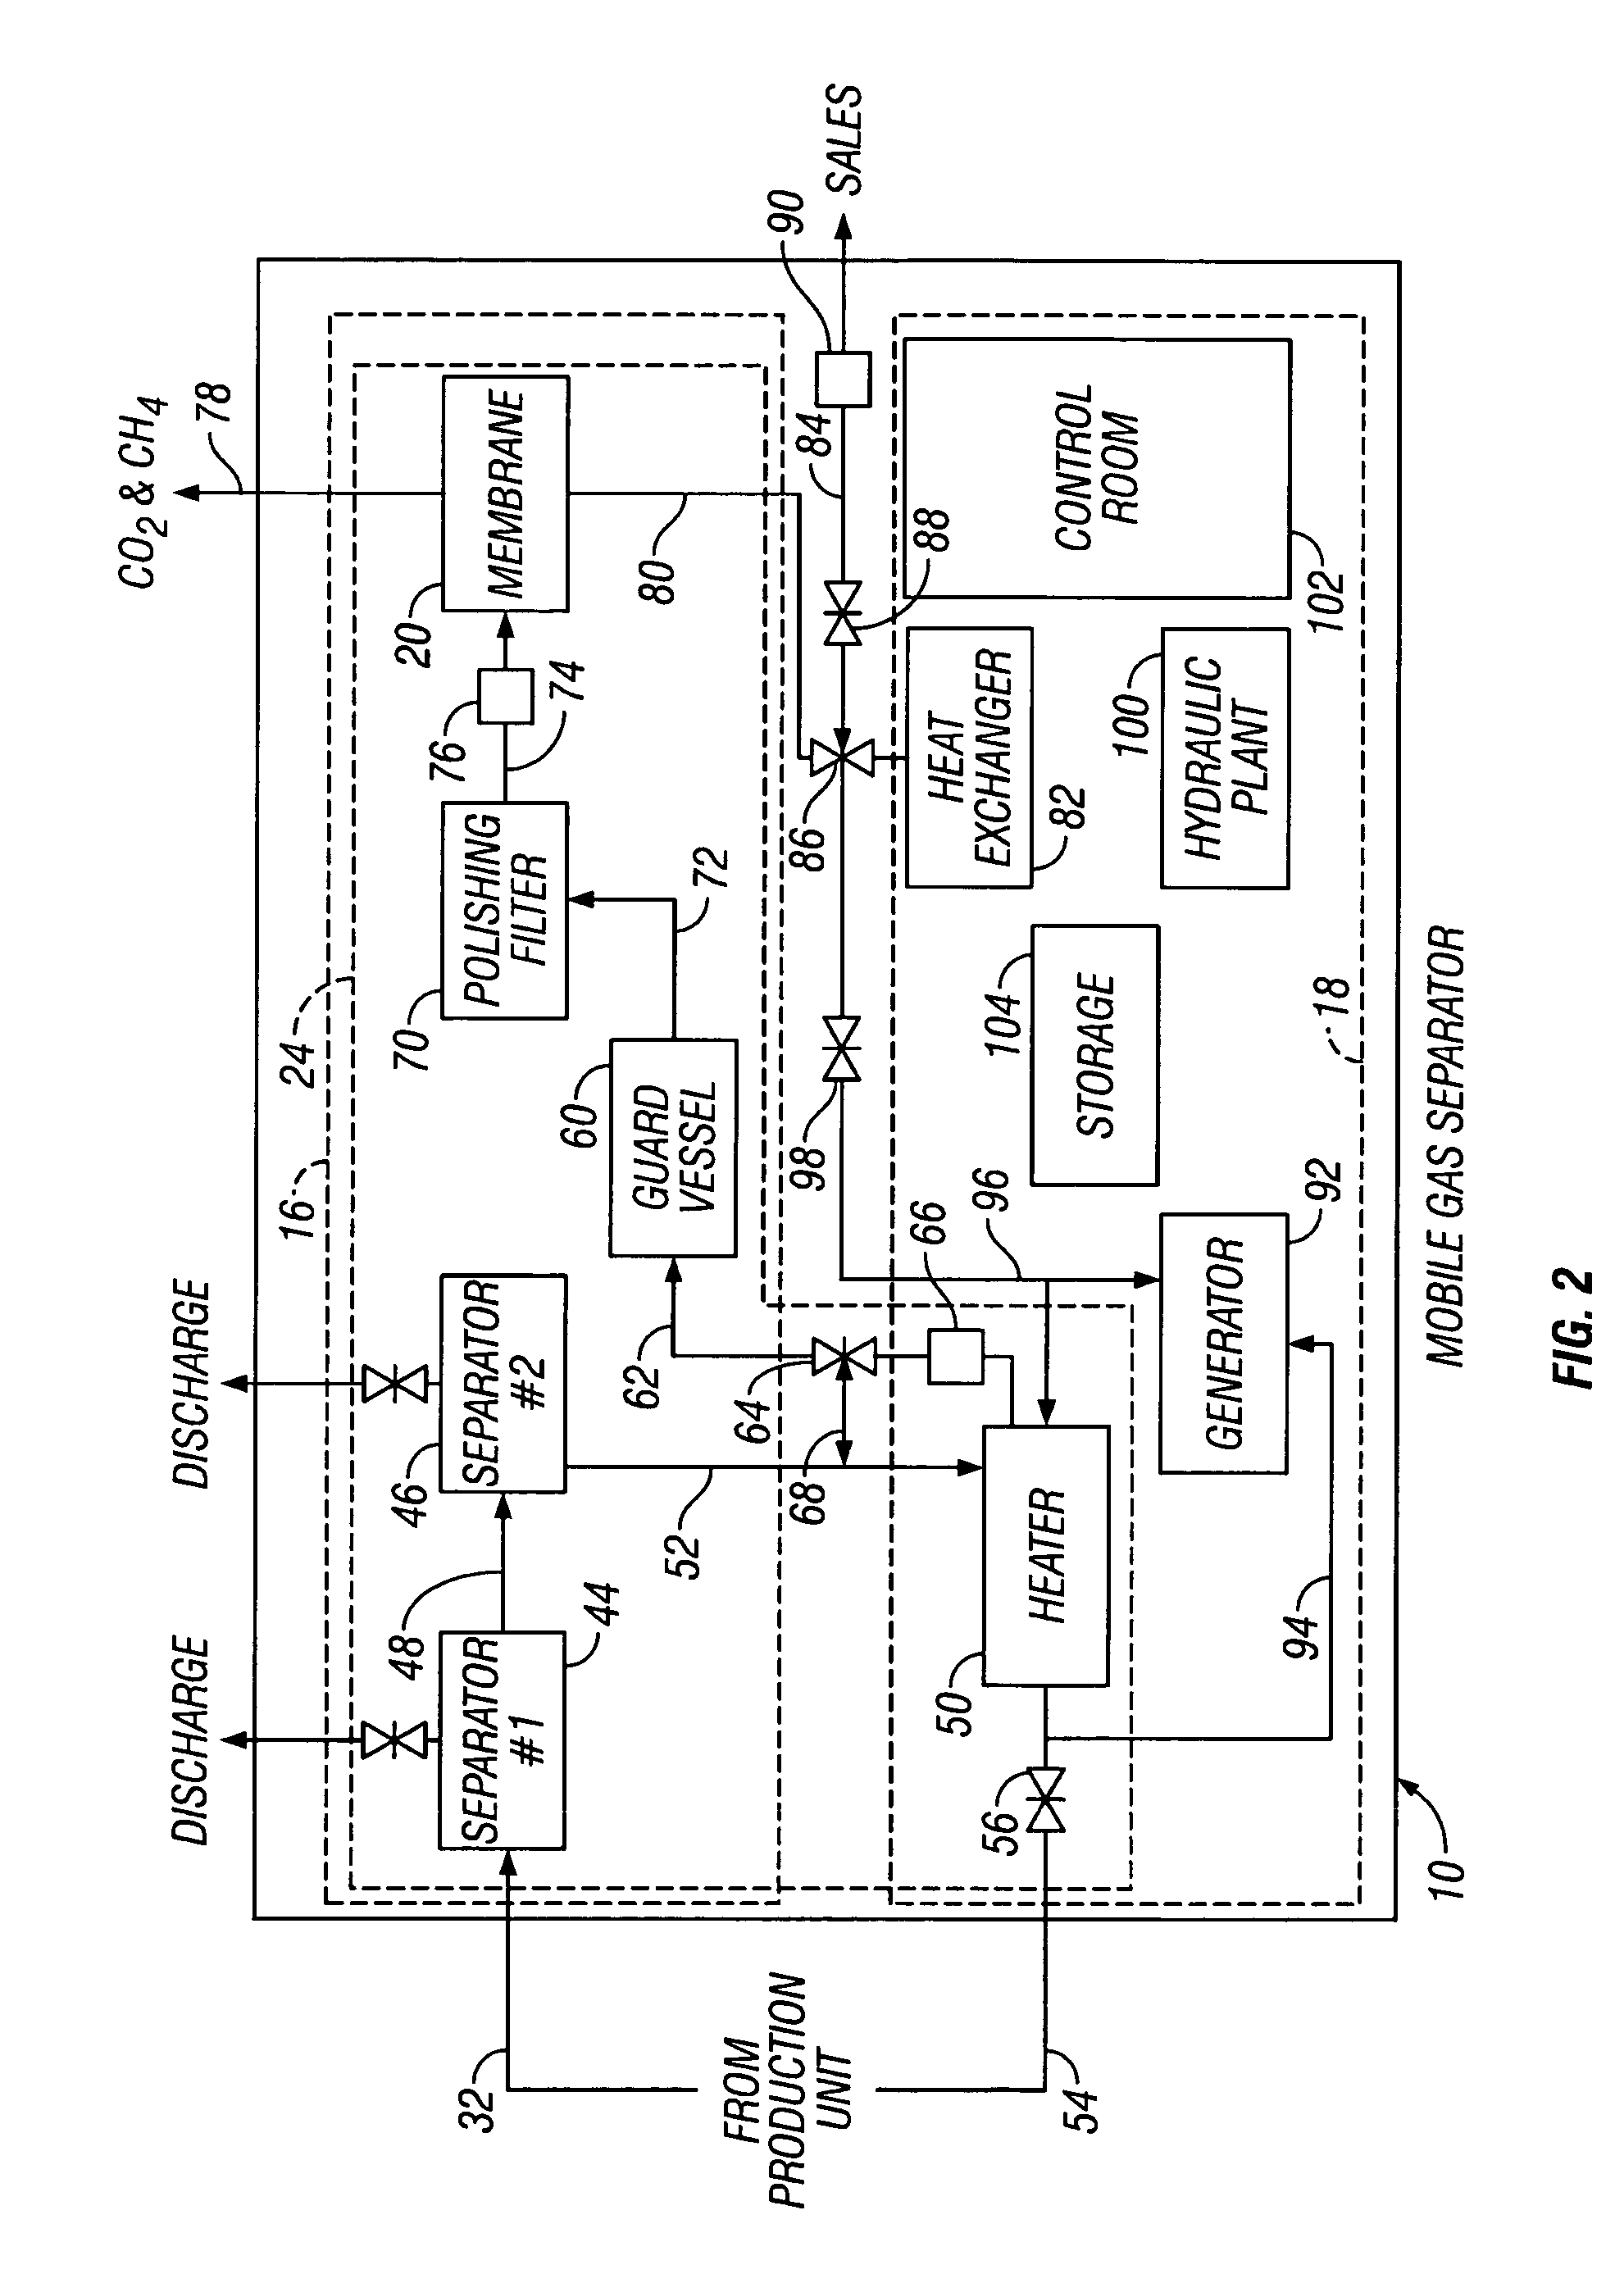 Mobile gas separator system and method for treating dirty gas at the well site of a stimulated well